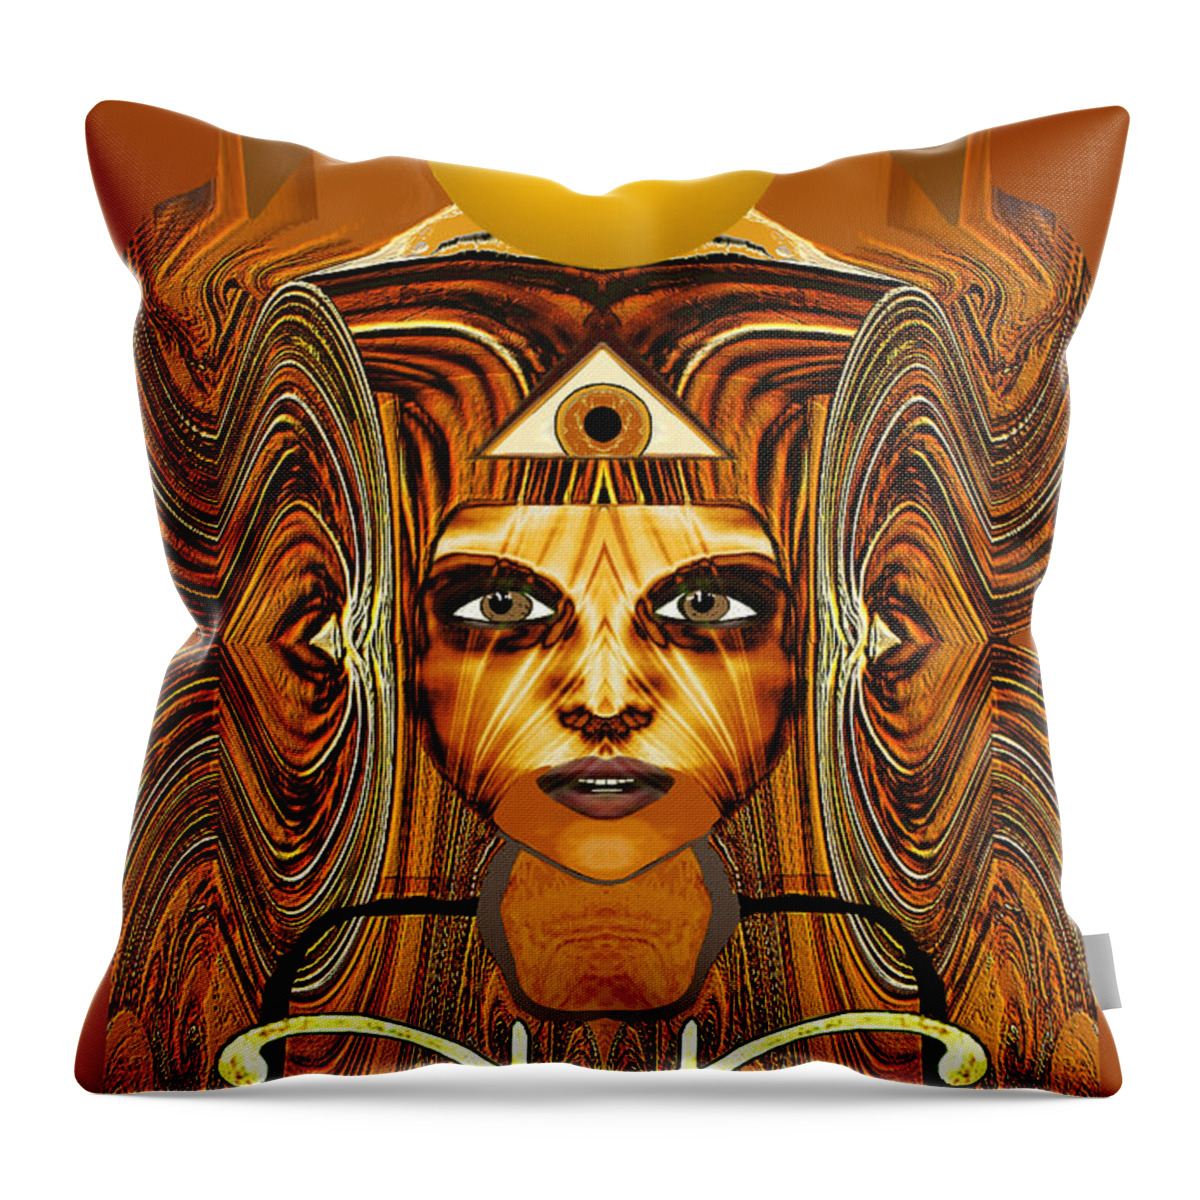 2927 Alien Girl With Egyptian Touch Throw Pillow featuring the digital art 2927 Golden Alien Girl with Egyptian Touch  by Irmgard Schoendorf Welch